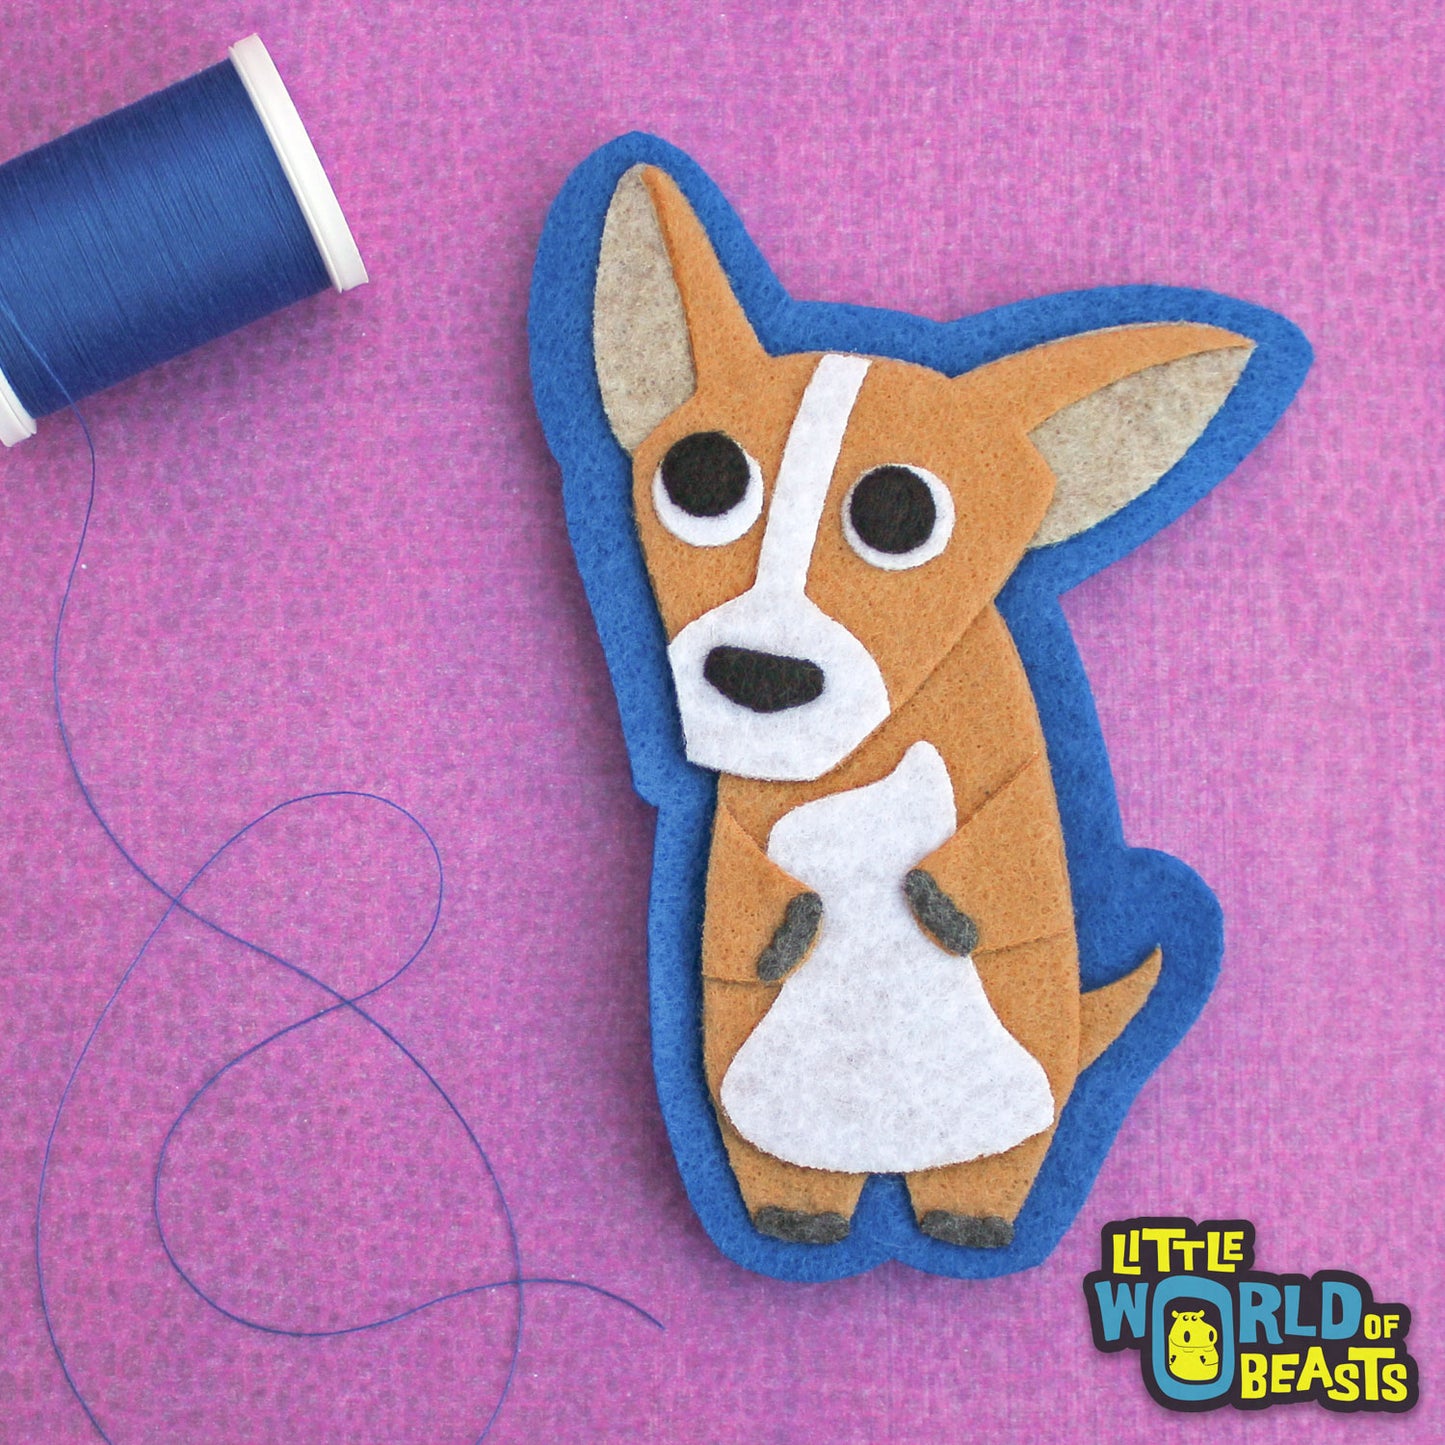 Habanero the Chihuahua Patch - Felt Animal Applique - Little World of Beasts